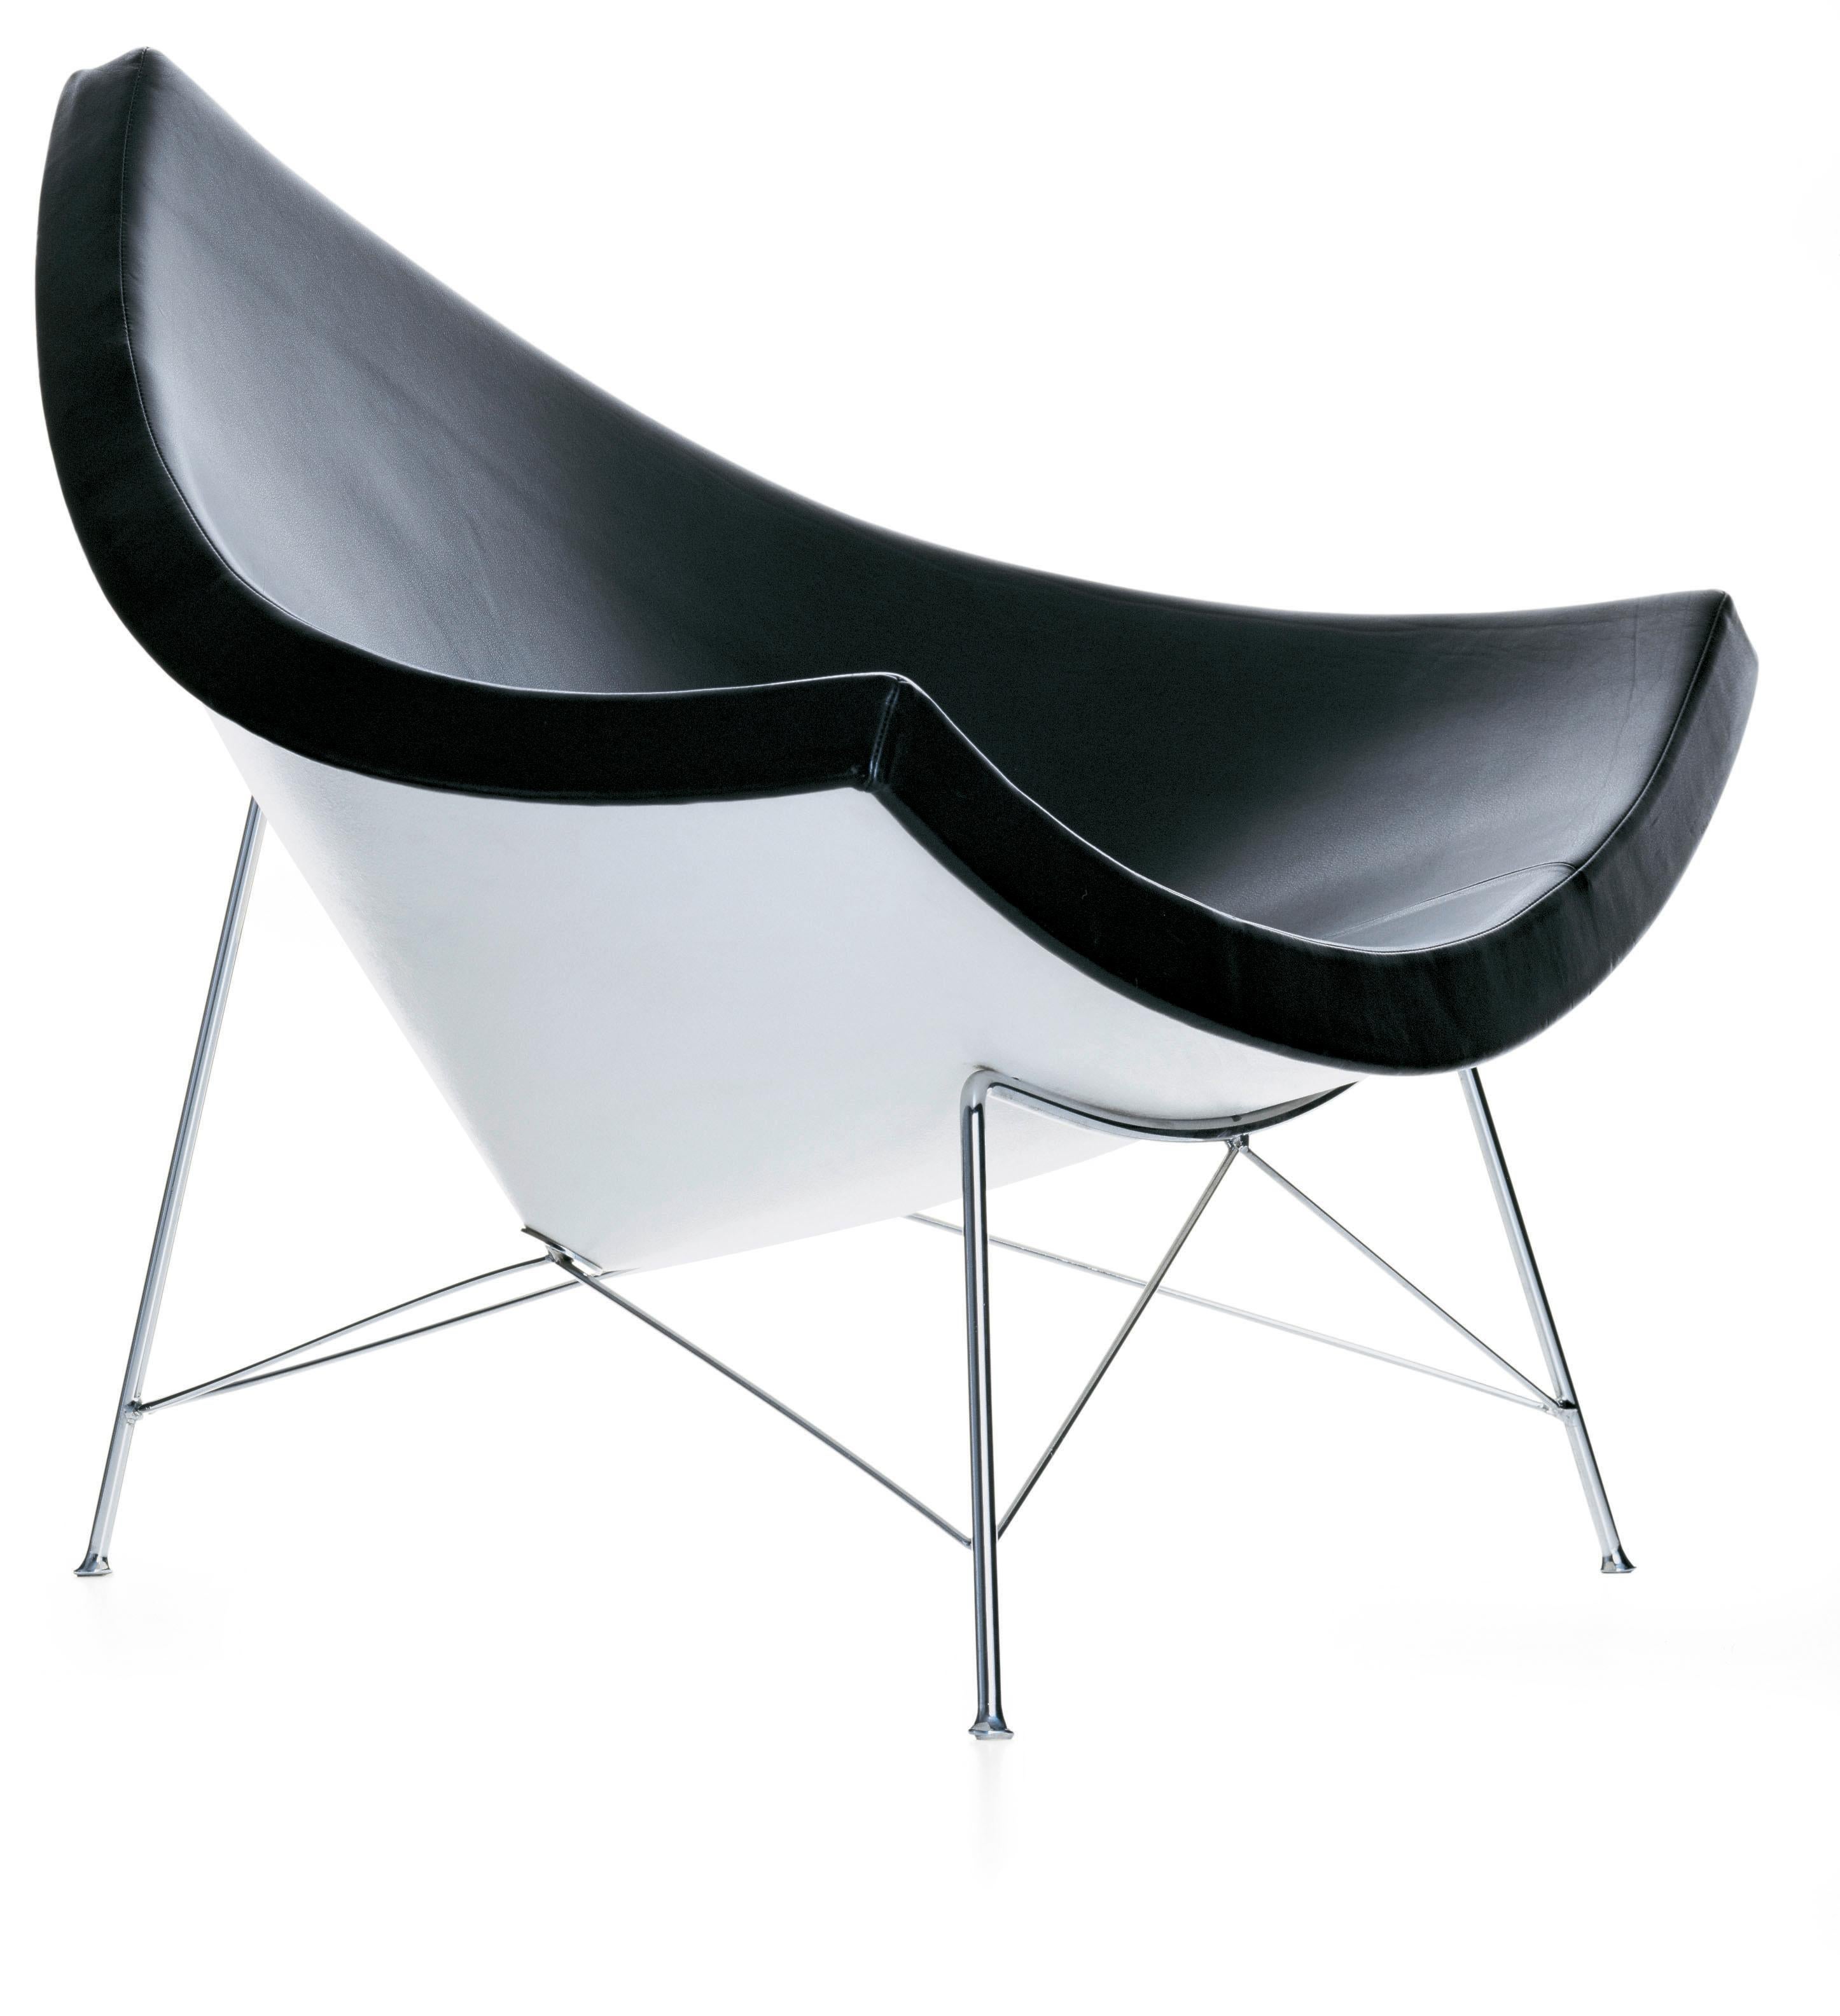 Modern Vitra Miniature Coconut Chair in Black with Chrome Legs by George Nelson For Sale